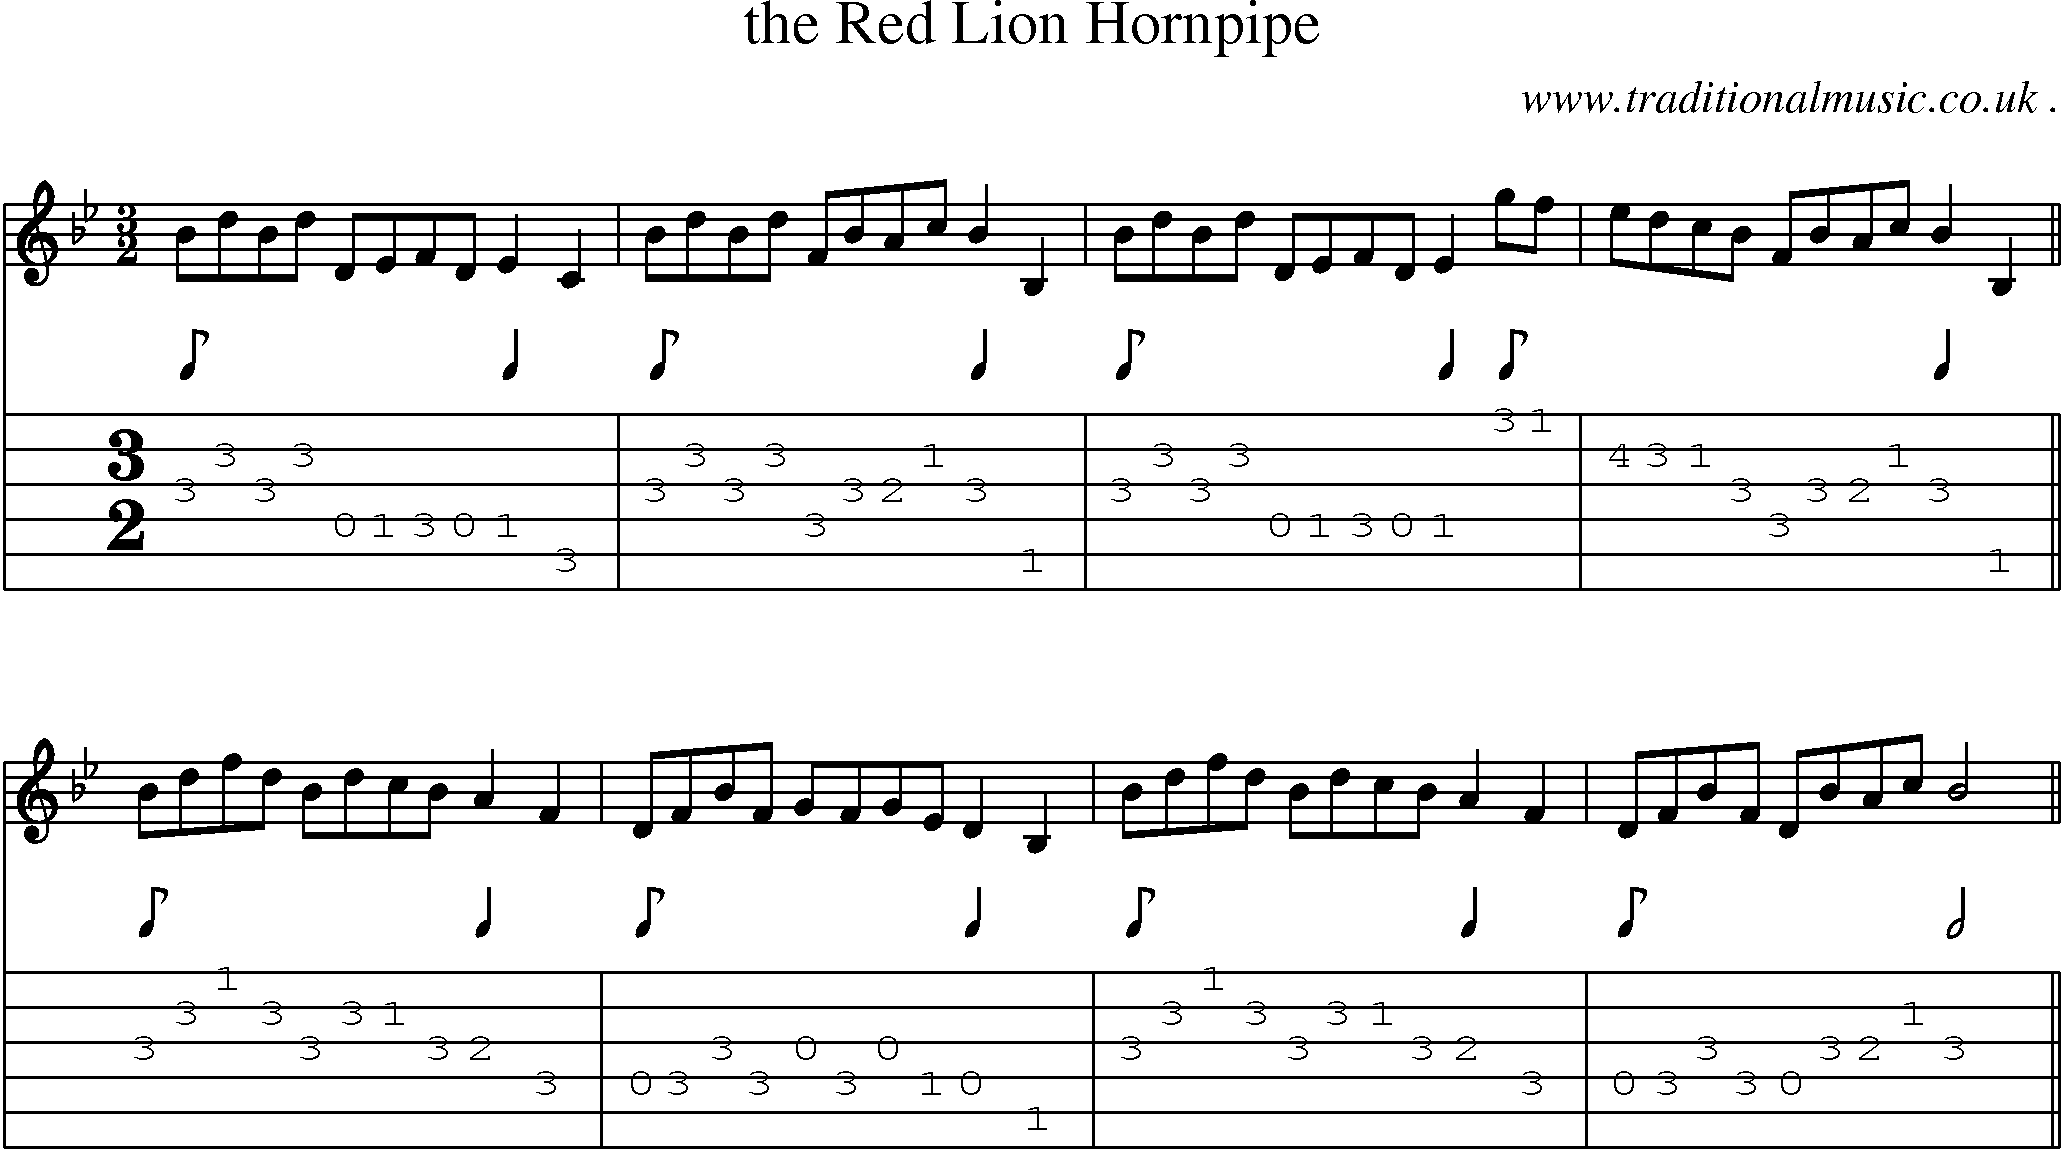 Sheet-Music and Guitar Tabs for The Red Lion Hornpipe